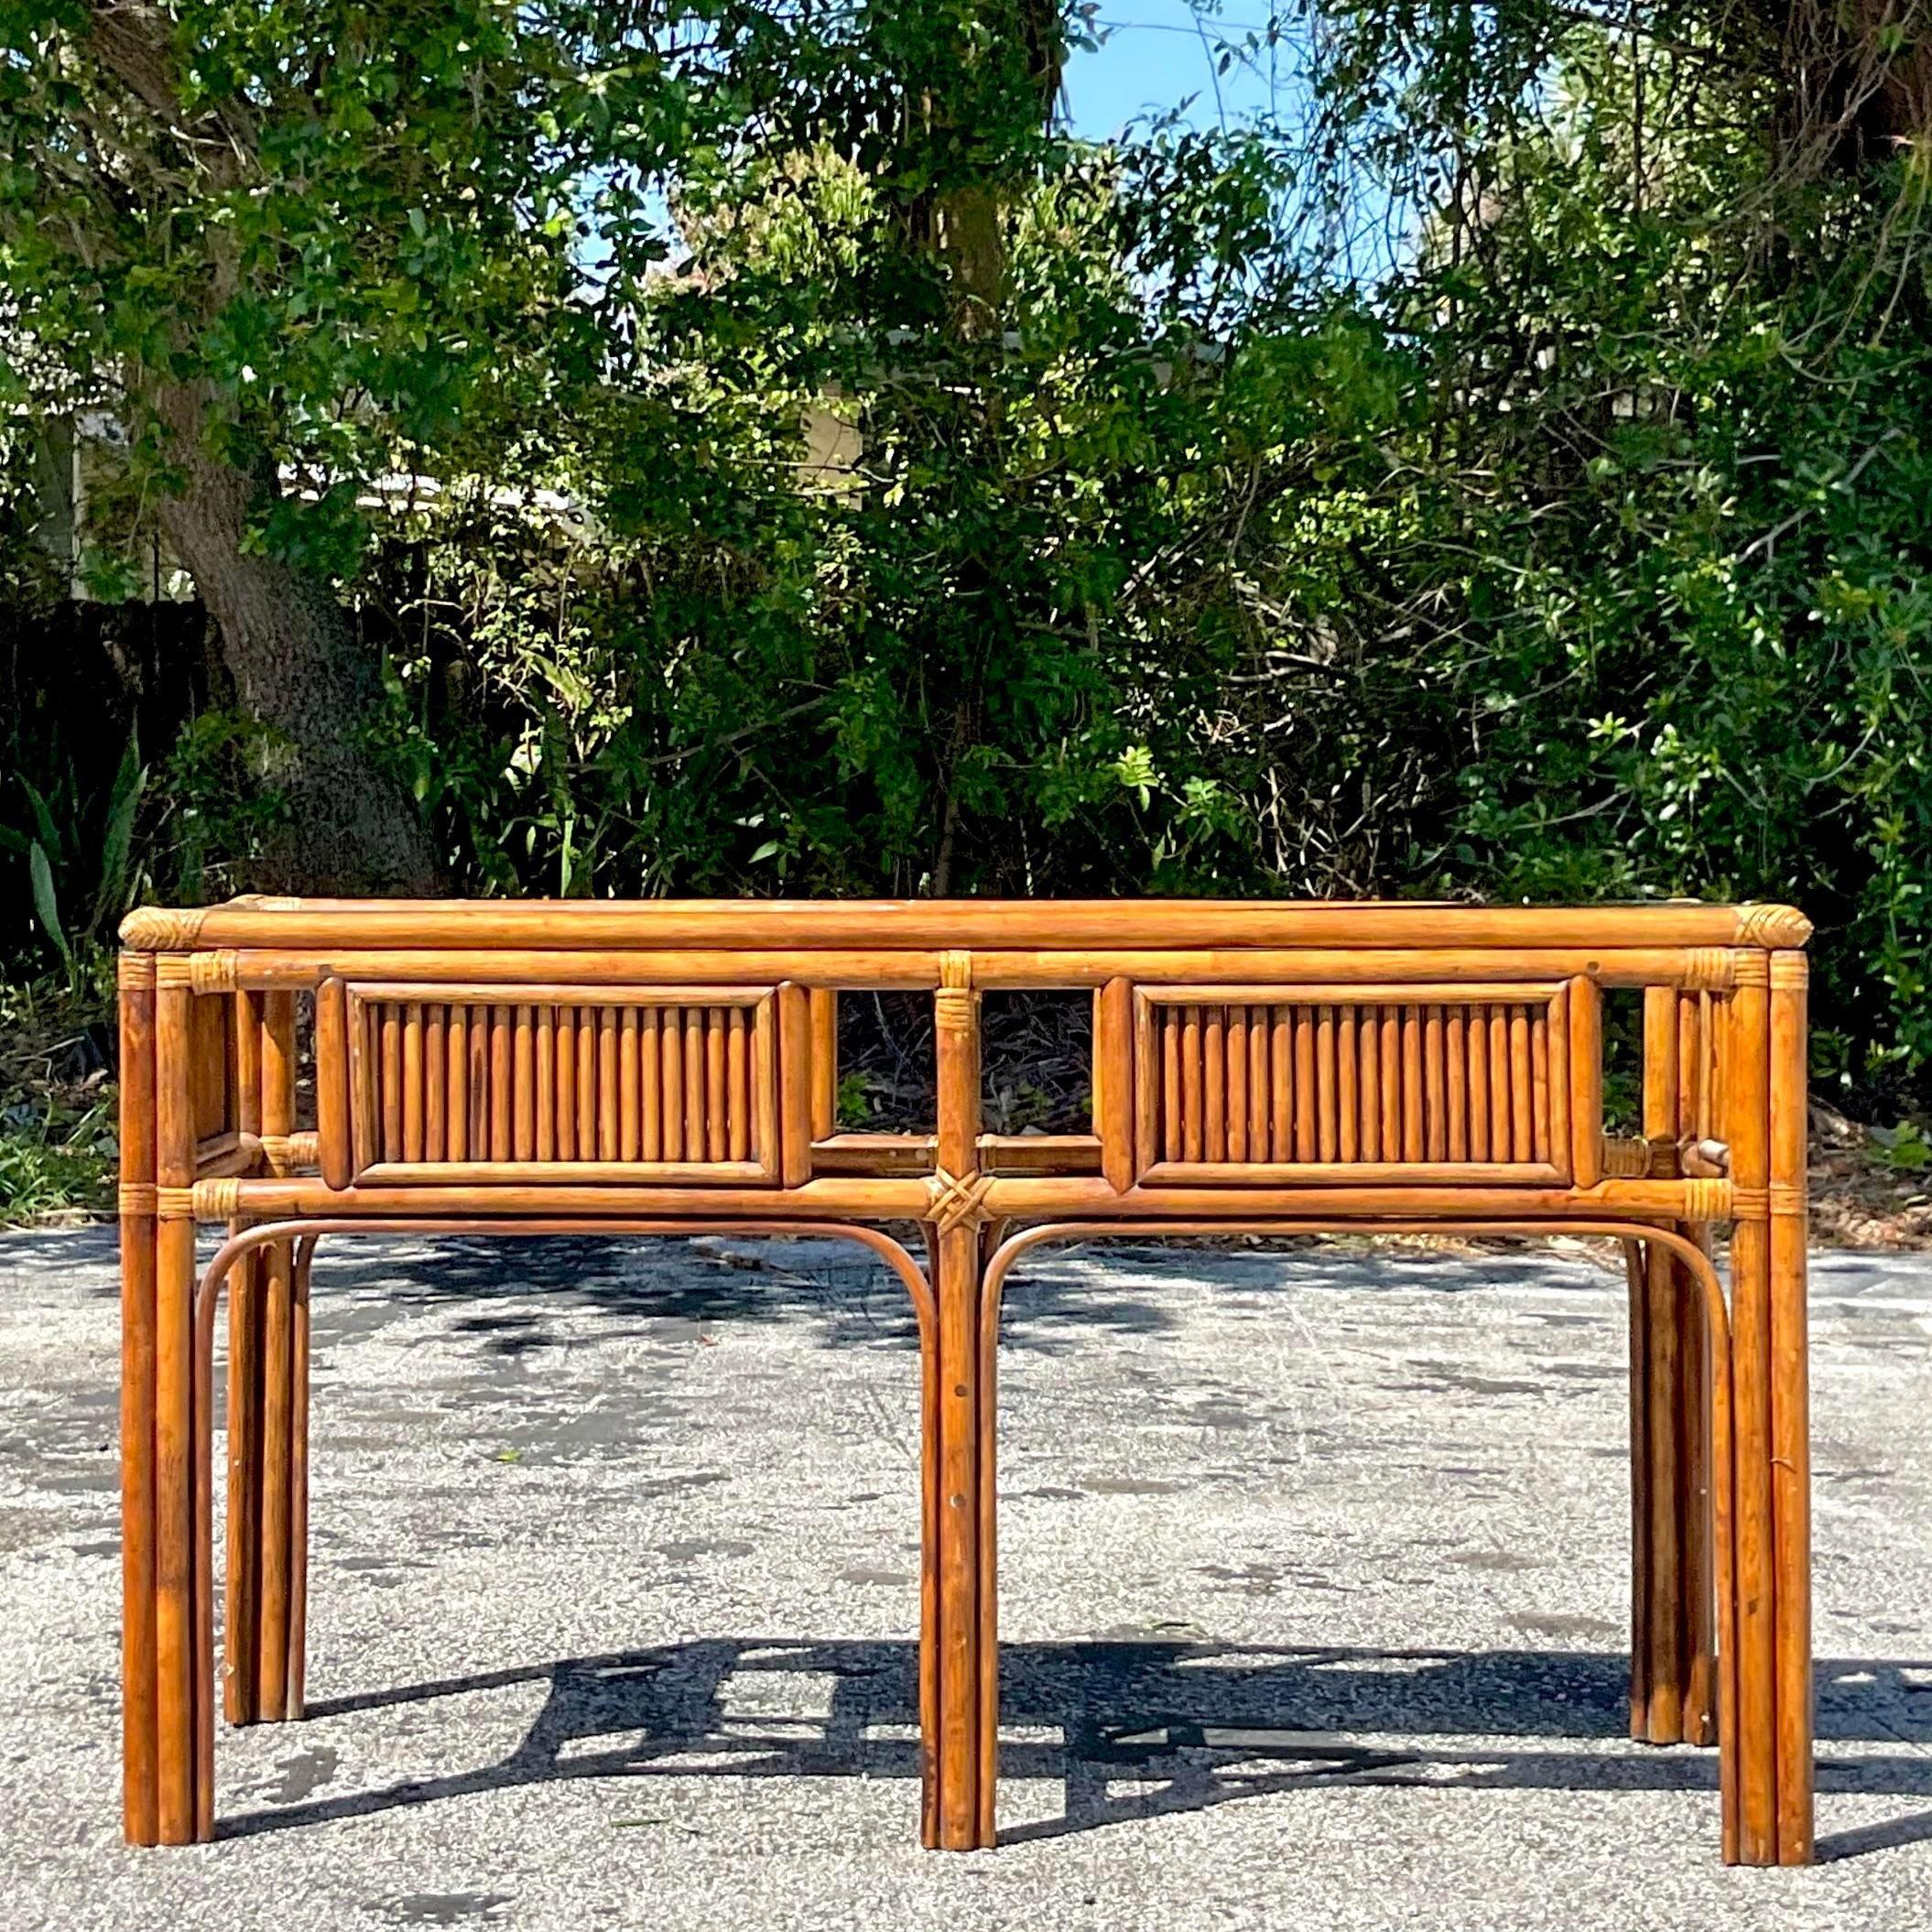 Bring coastal elegance into your home with the Vintage Coastal Rattan Console Table with inset glass top. Crafted with meticulous attention to detail, this table embodies classic American coastal style. The rattan construction adds a touch of